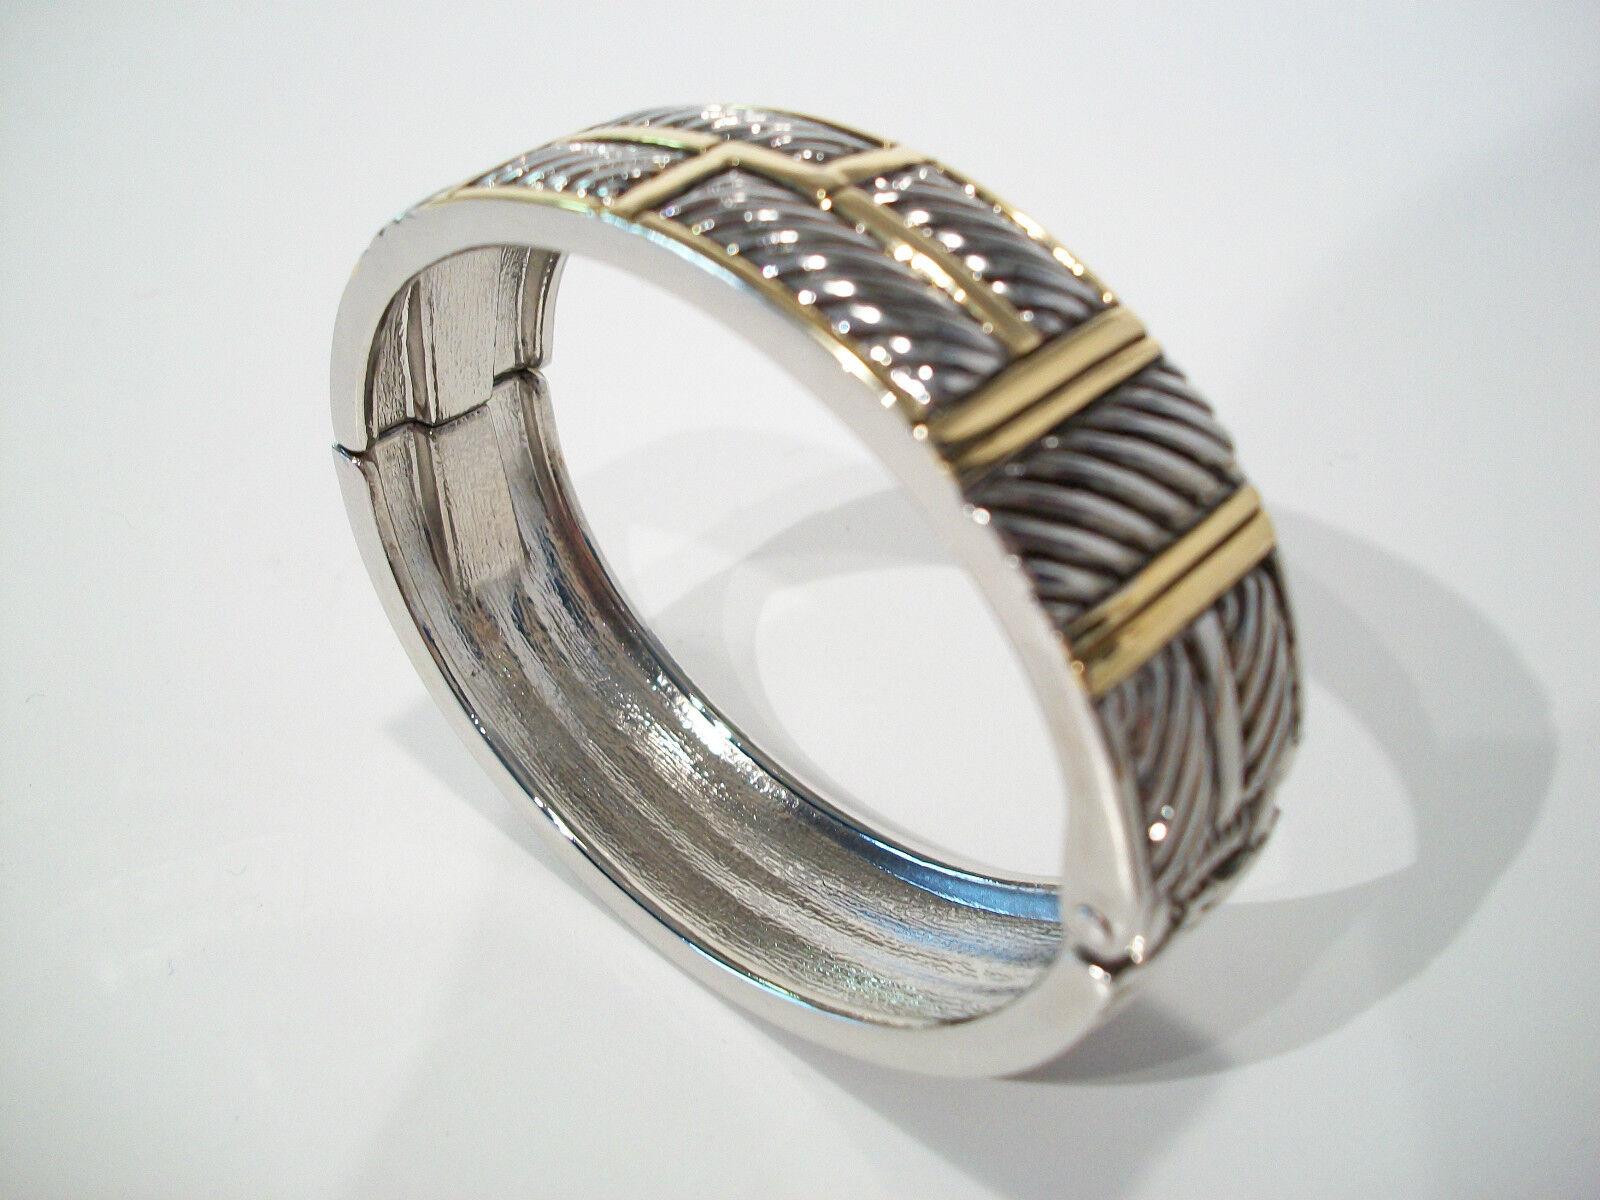 Vintage Hinged Two Tone Metal Clamper Bangle Bracelet - Unsigned - Circa 1980's For Sale 2